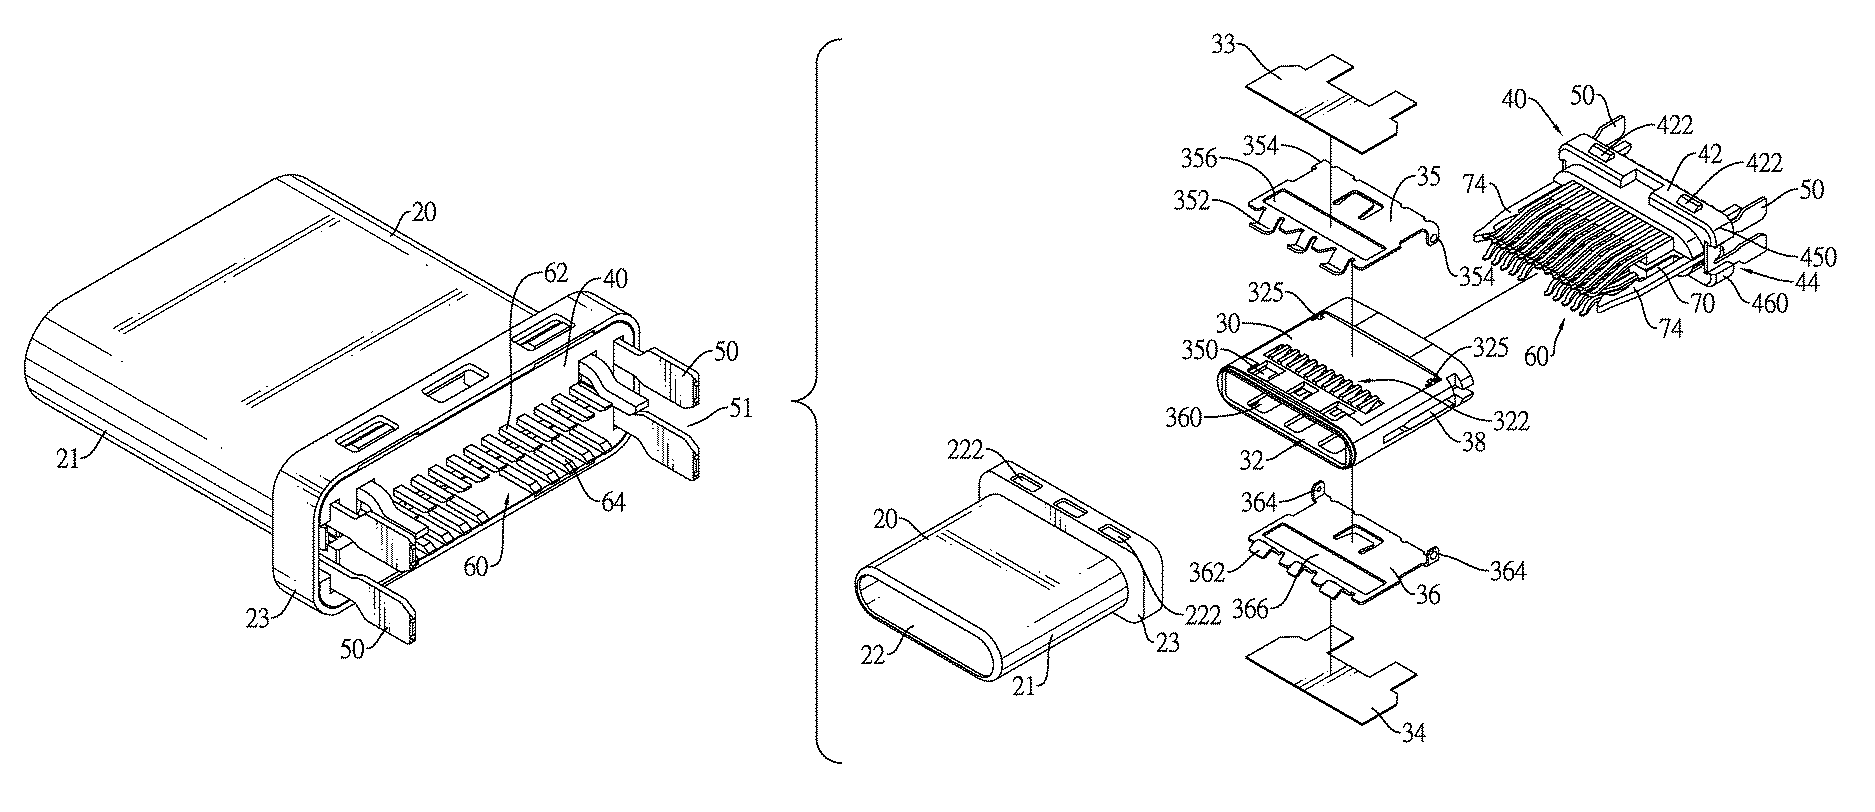 Electrical connector having holding pieces with a notch for holding a circuit board